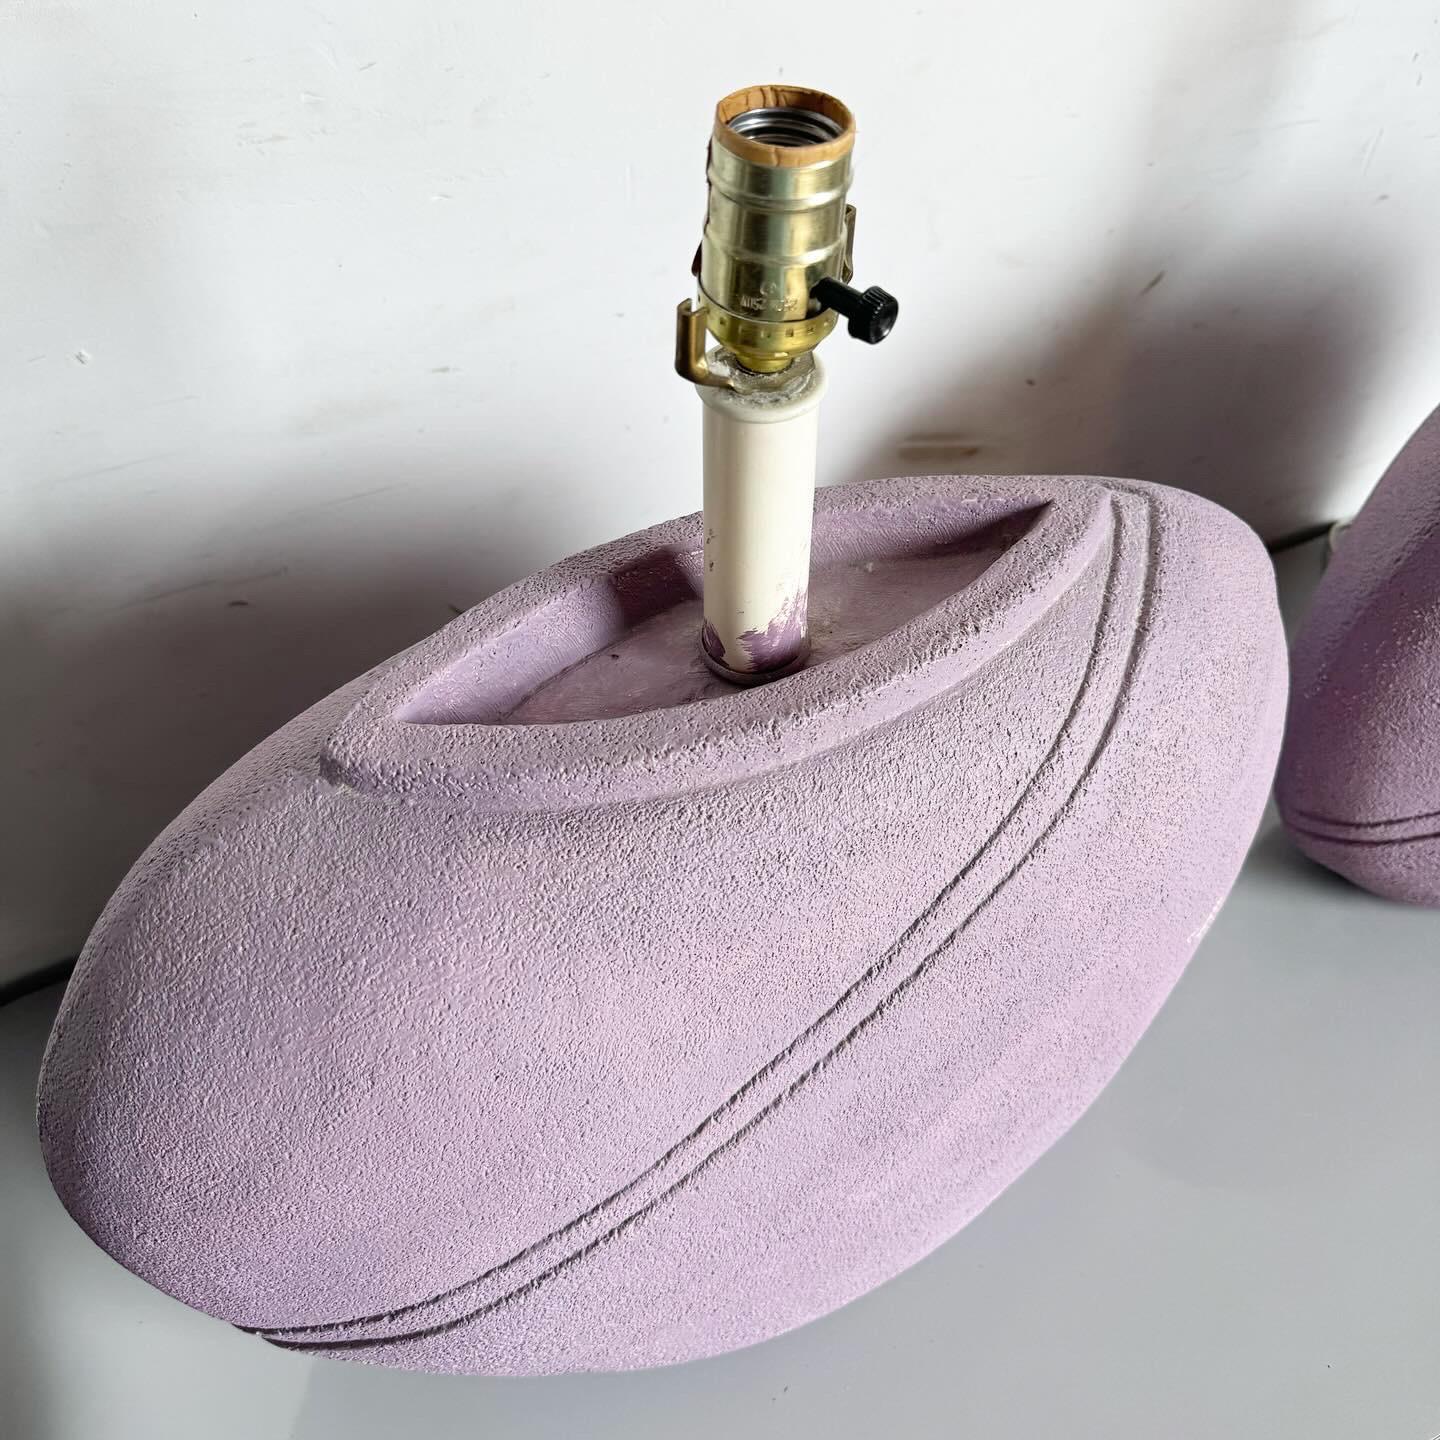 Postmodern Lavender Purple Vase Table Lamps - a Pair In Good Condition For Sale In Delray Beach, FL